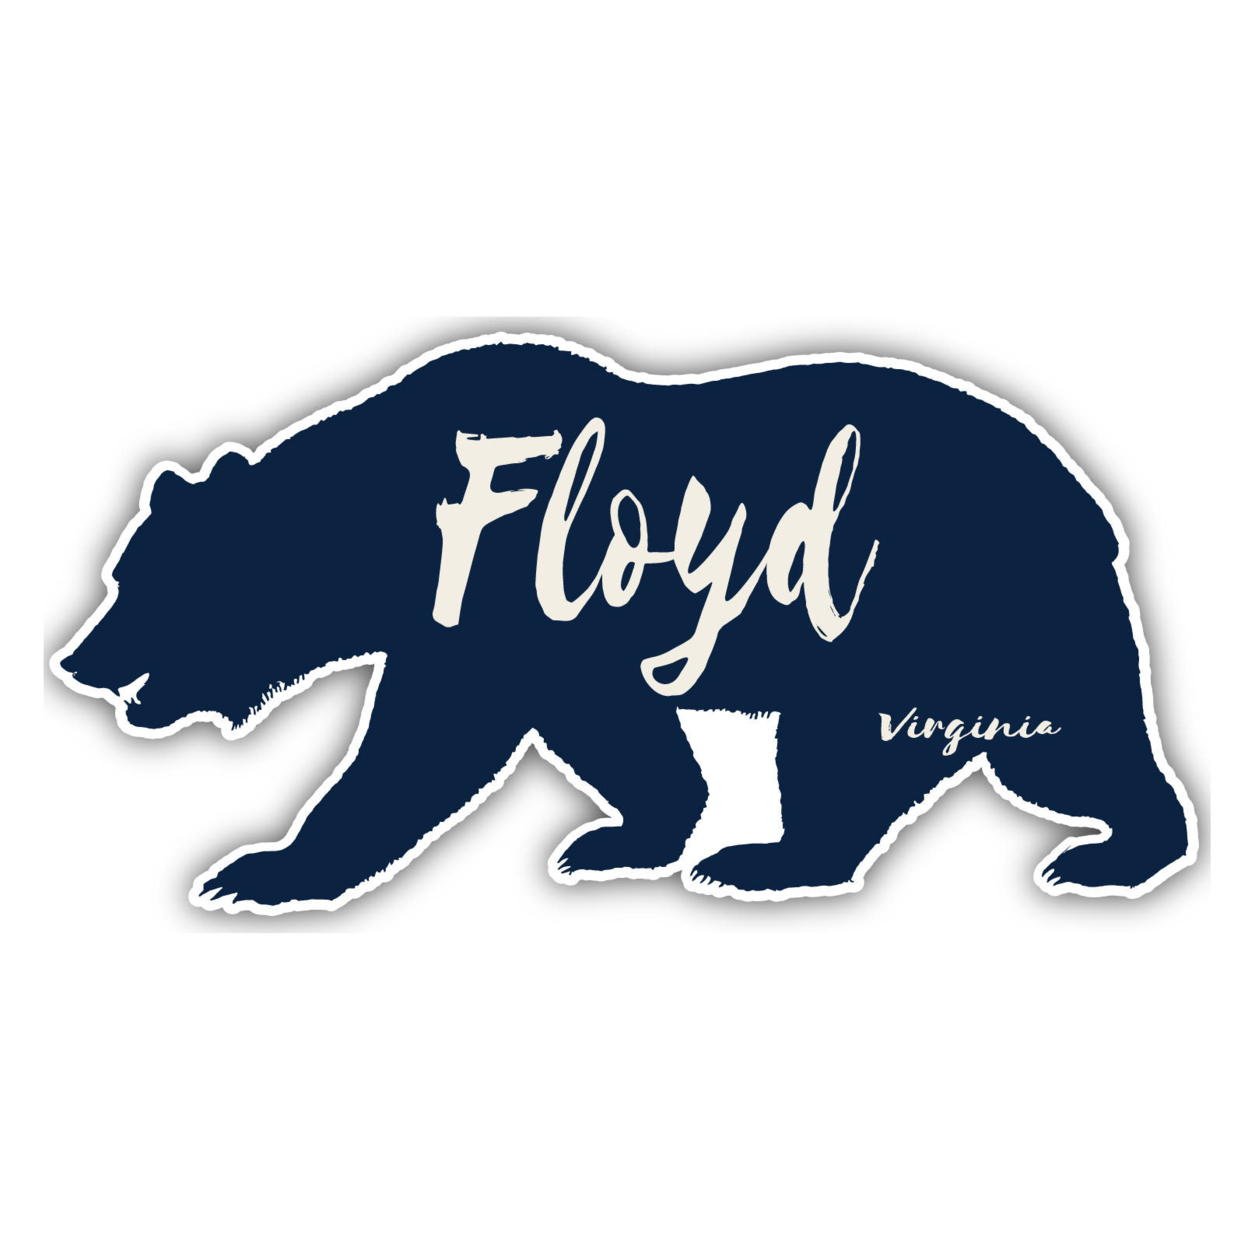 Floyd Virginia Souvenir Decorative Stickers (Choose Theme And Size) - Single Unit, 8-Inch, Great Outdoors